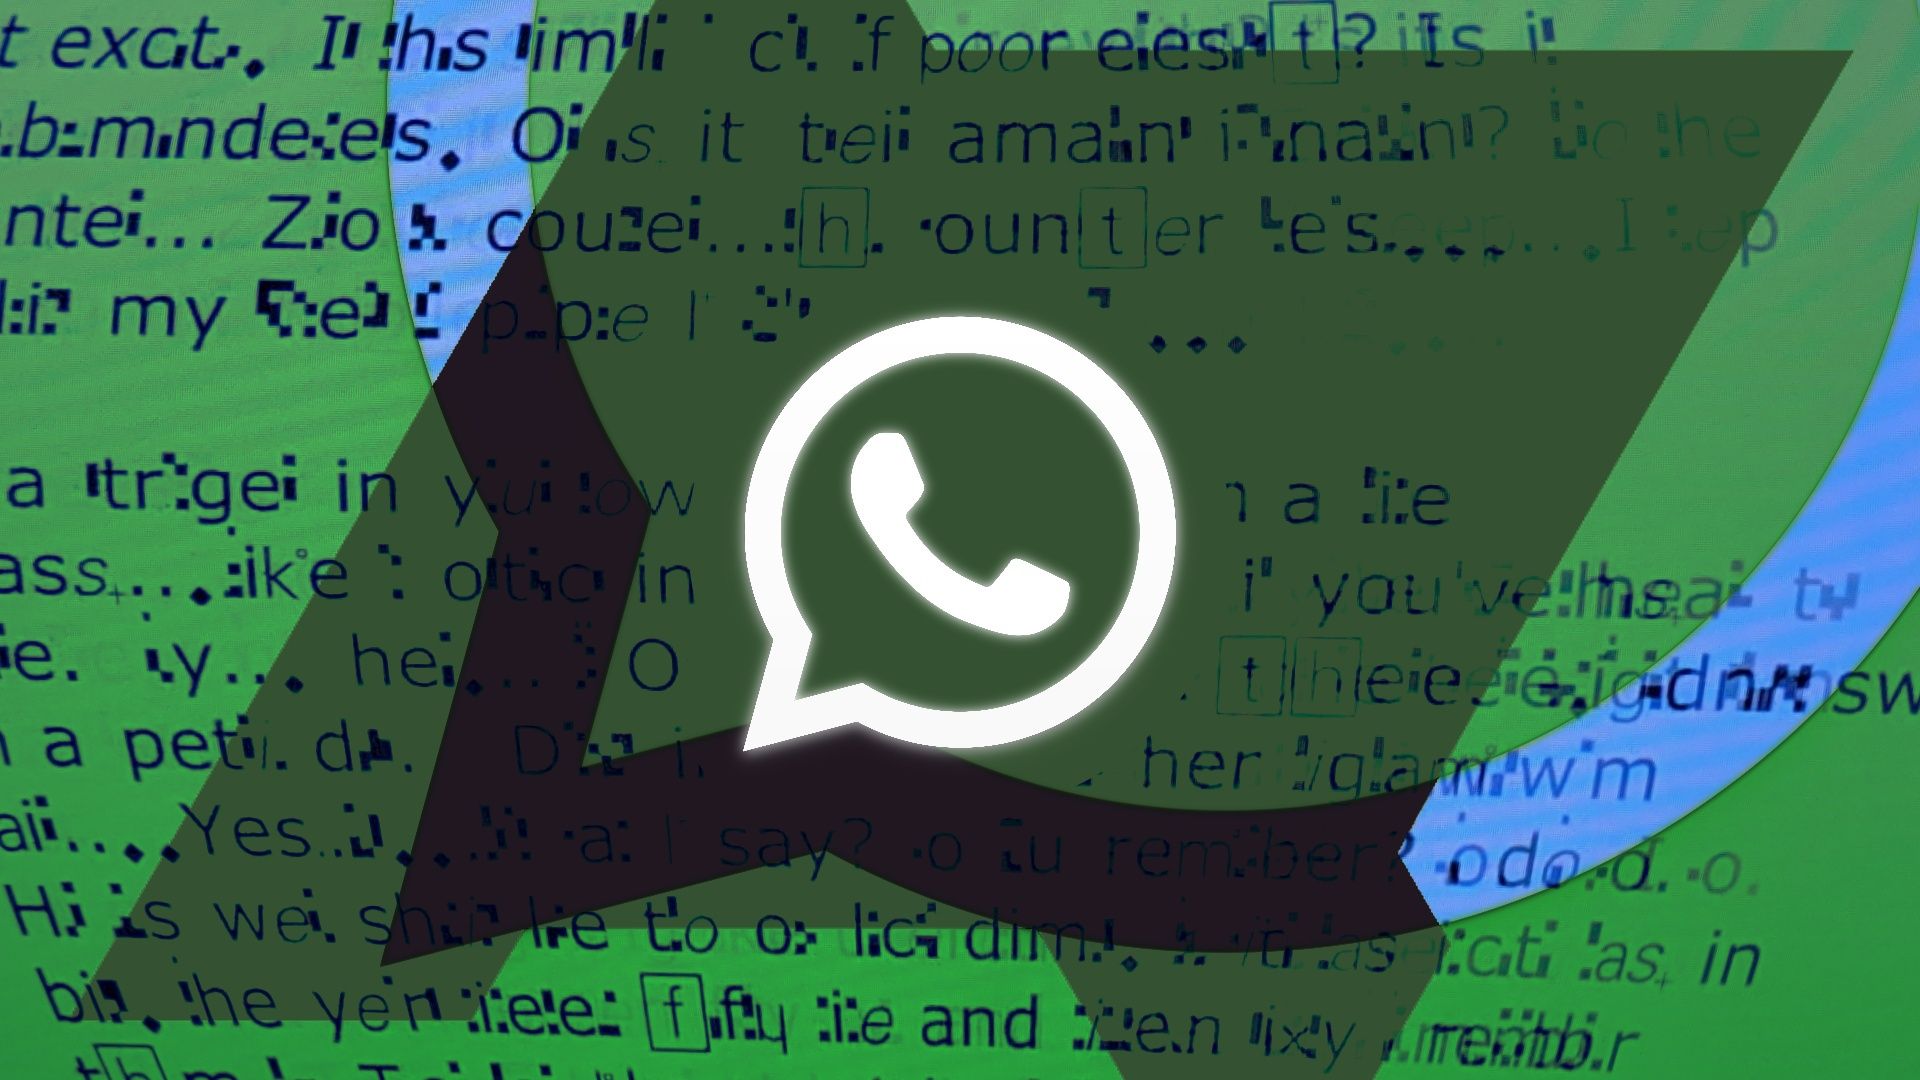 Enhancing Your WhatsApp Experience with Animated Stickers